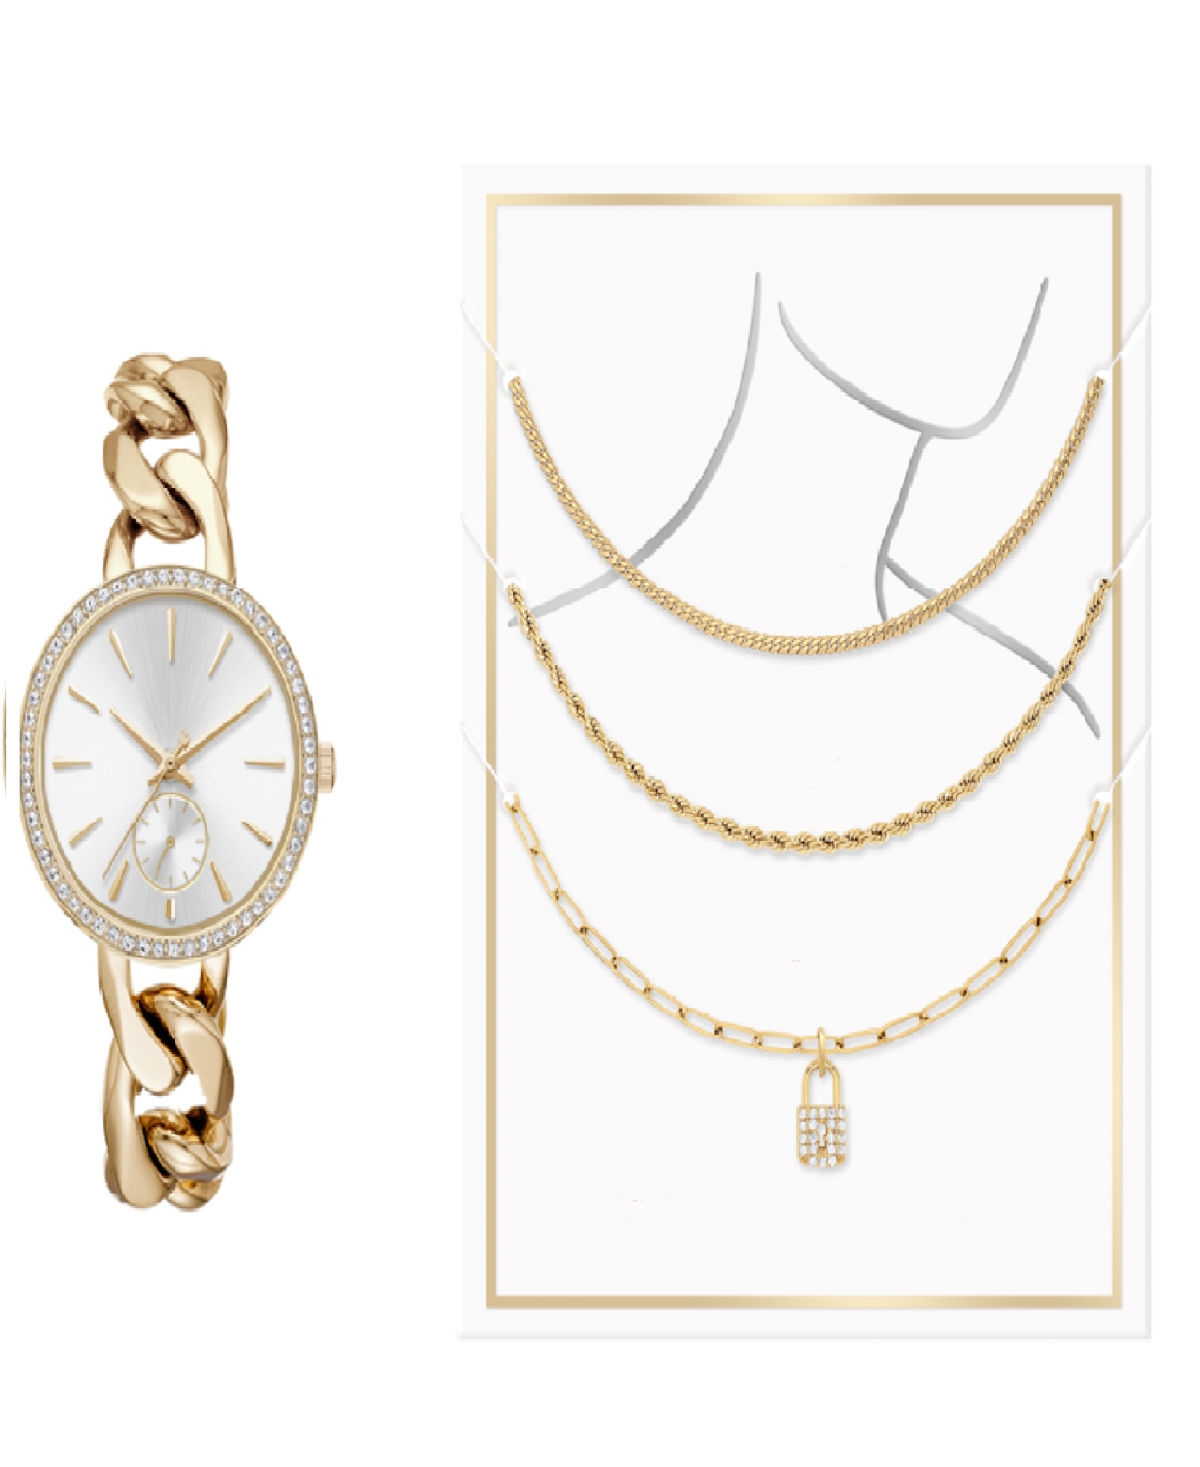 Jessica Carlyle Women's Quartz Gold-tone Alloy Watch 34mm Gift Set In Shiny Gold,silver Sunray